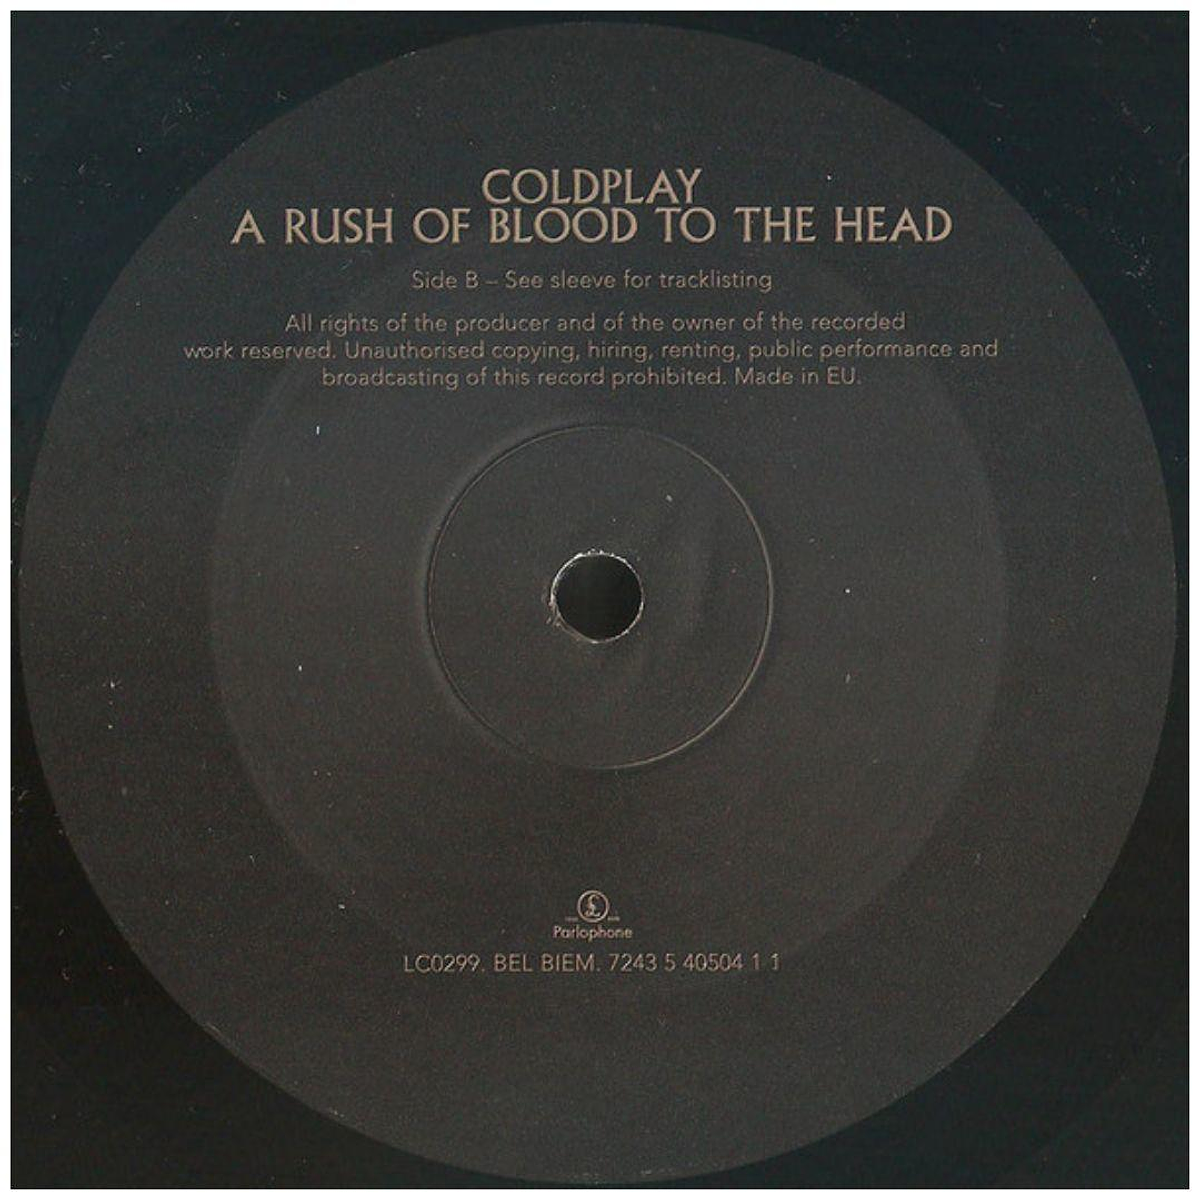 COLDPLAY - A RUSH OF BLOOD TO THE HEAD VINILO